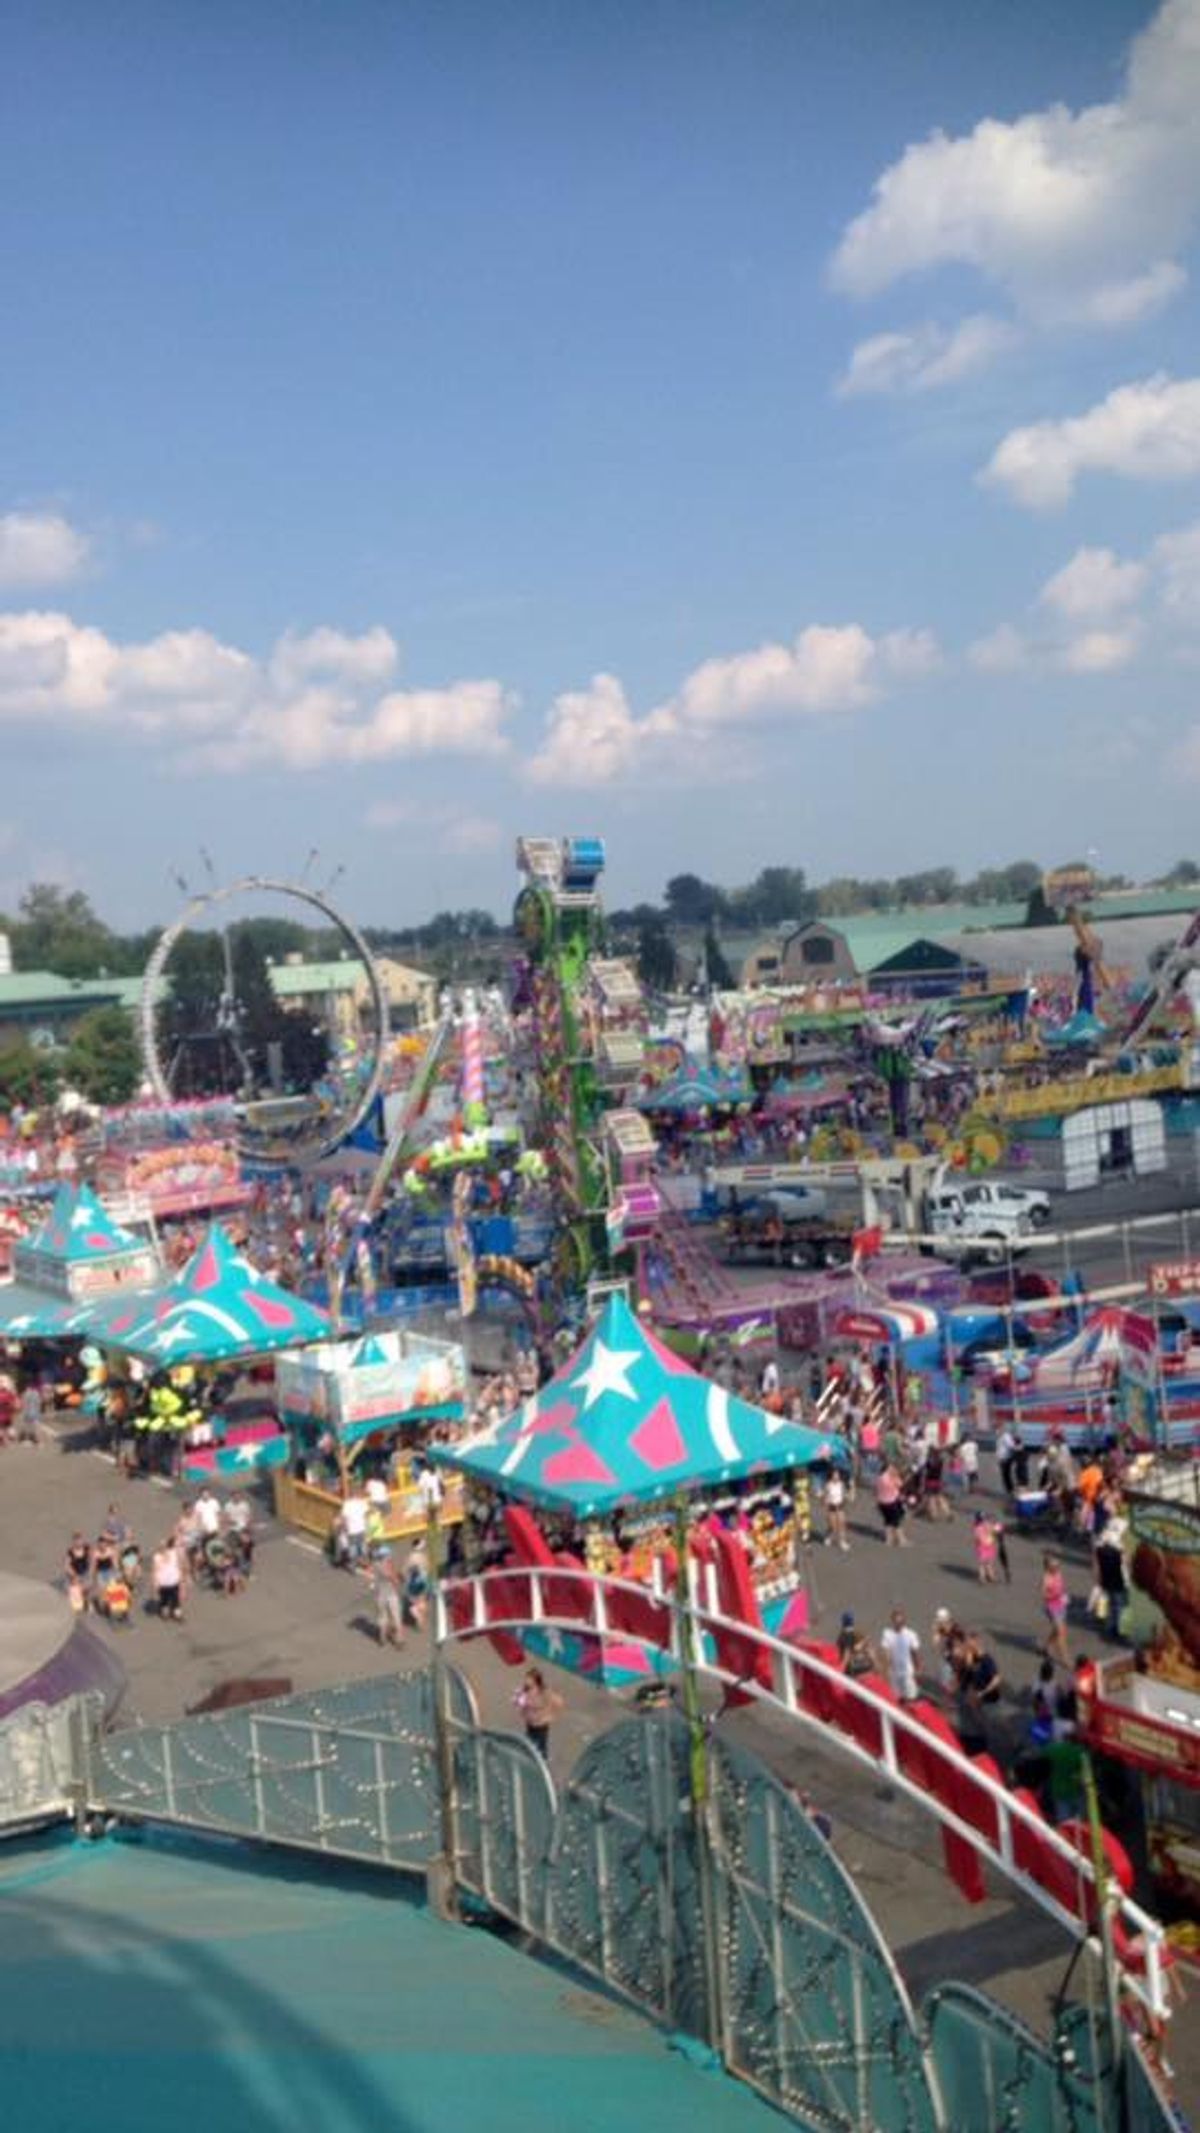 The Great New York State Fair